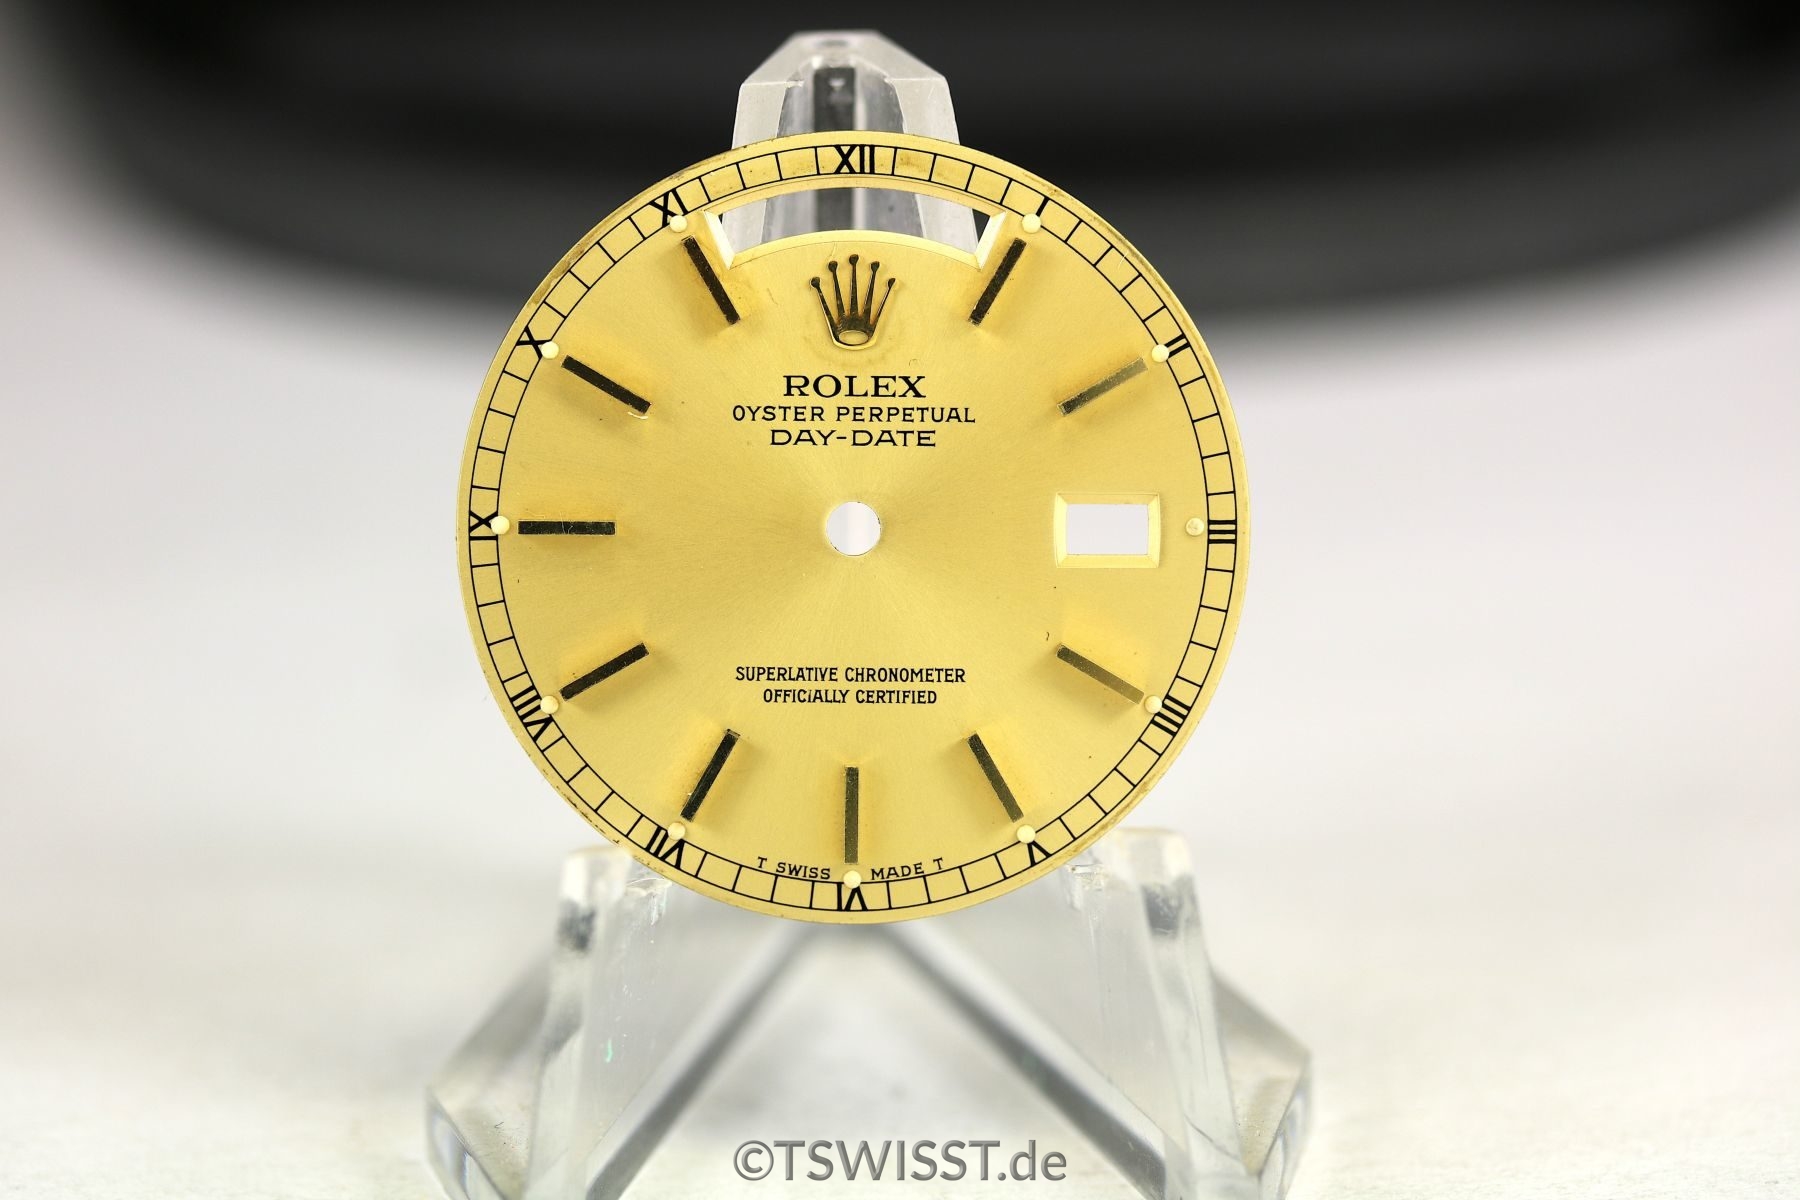 Rolex Day-Date dial incl. hands